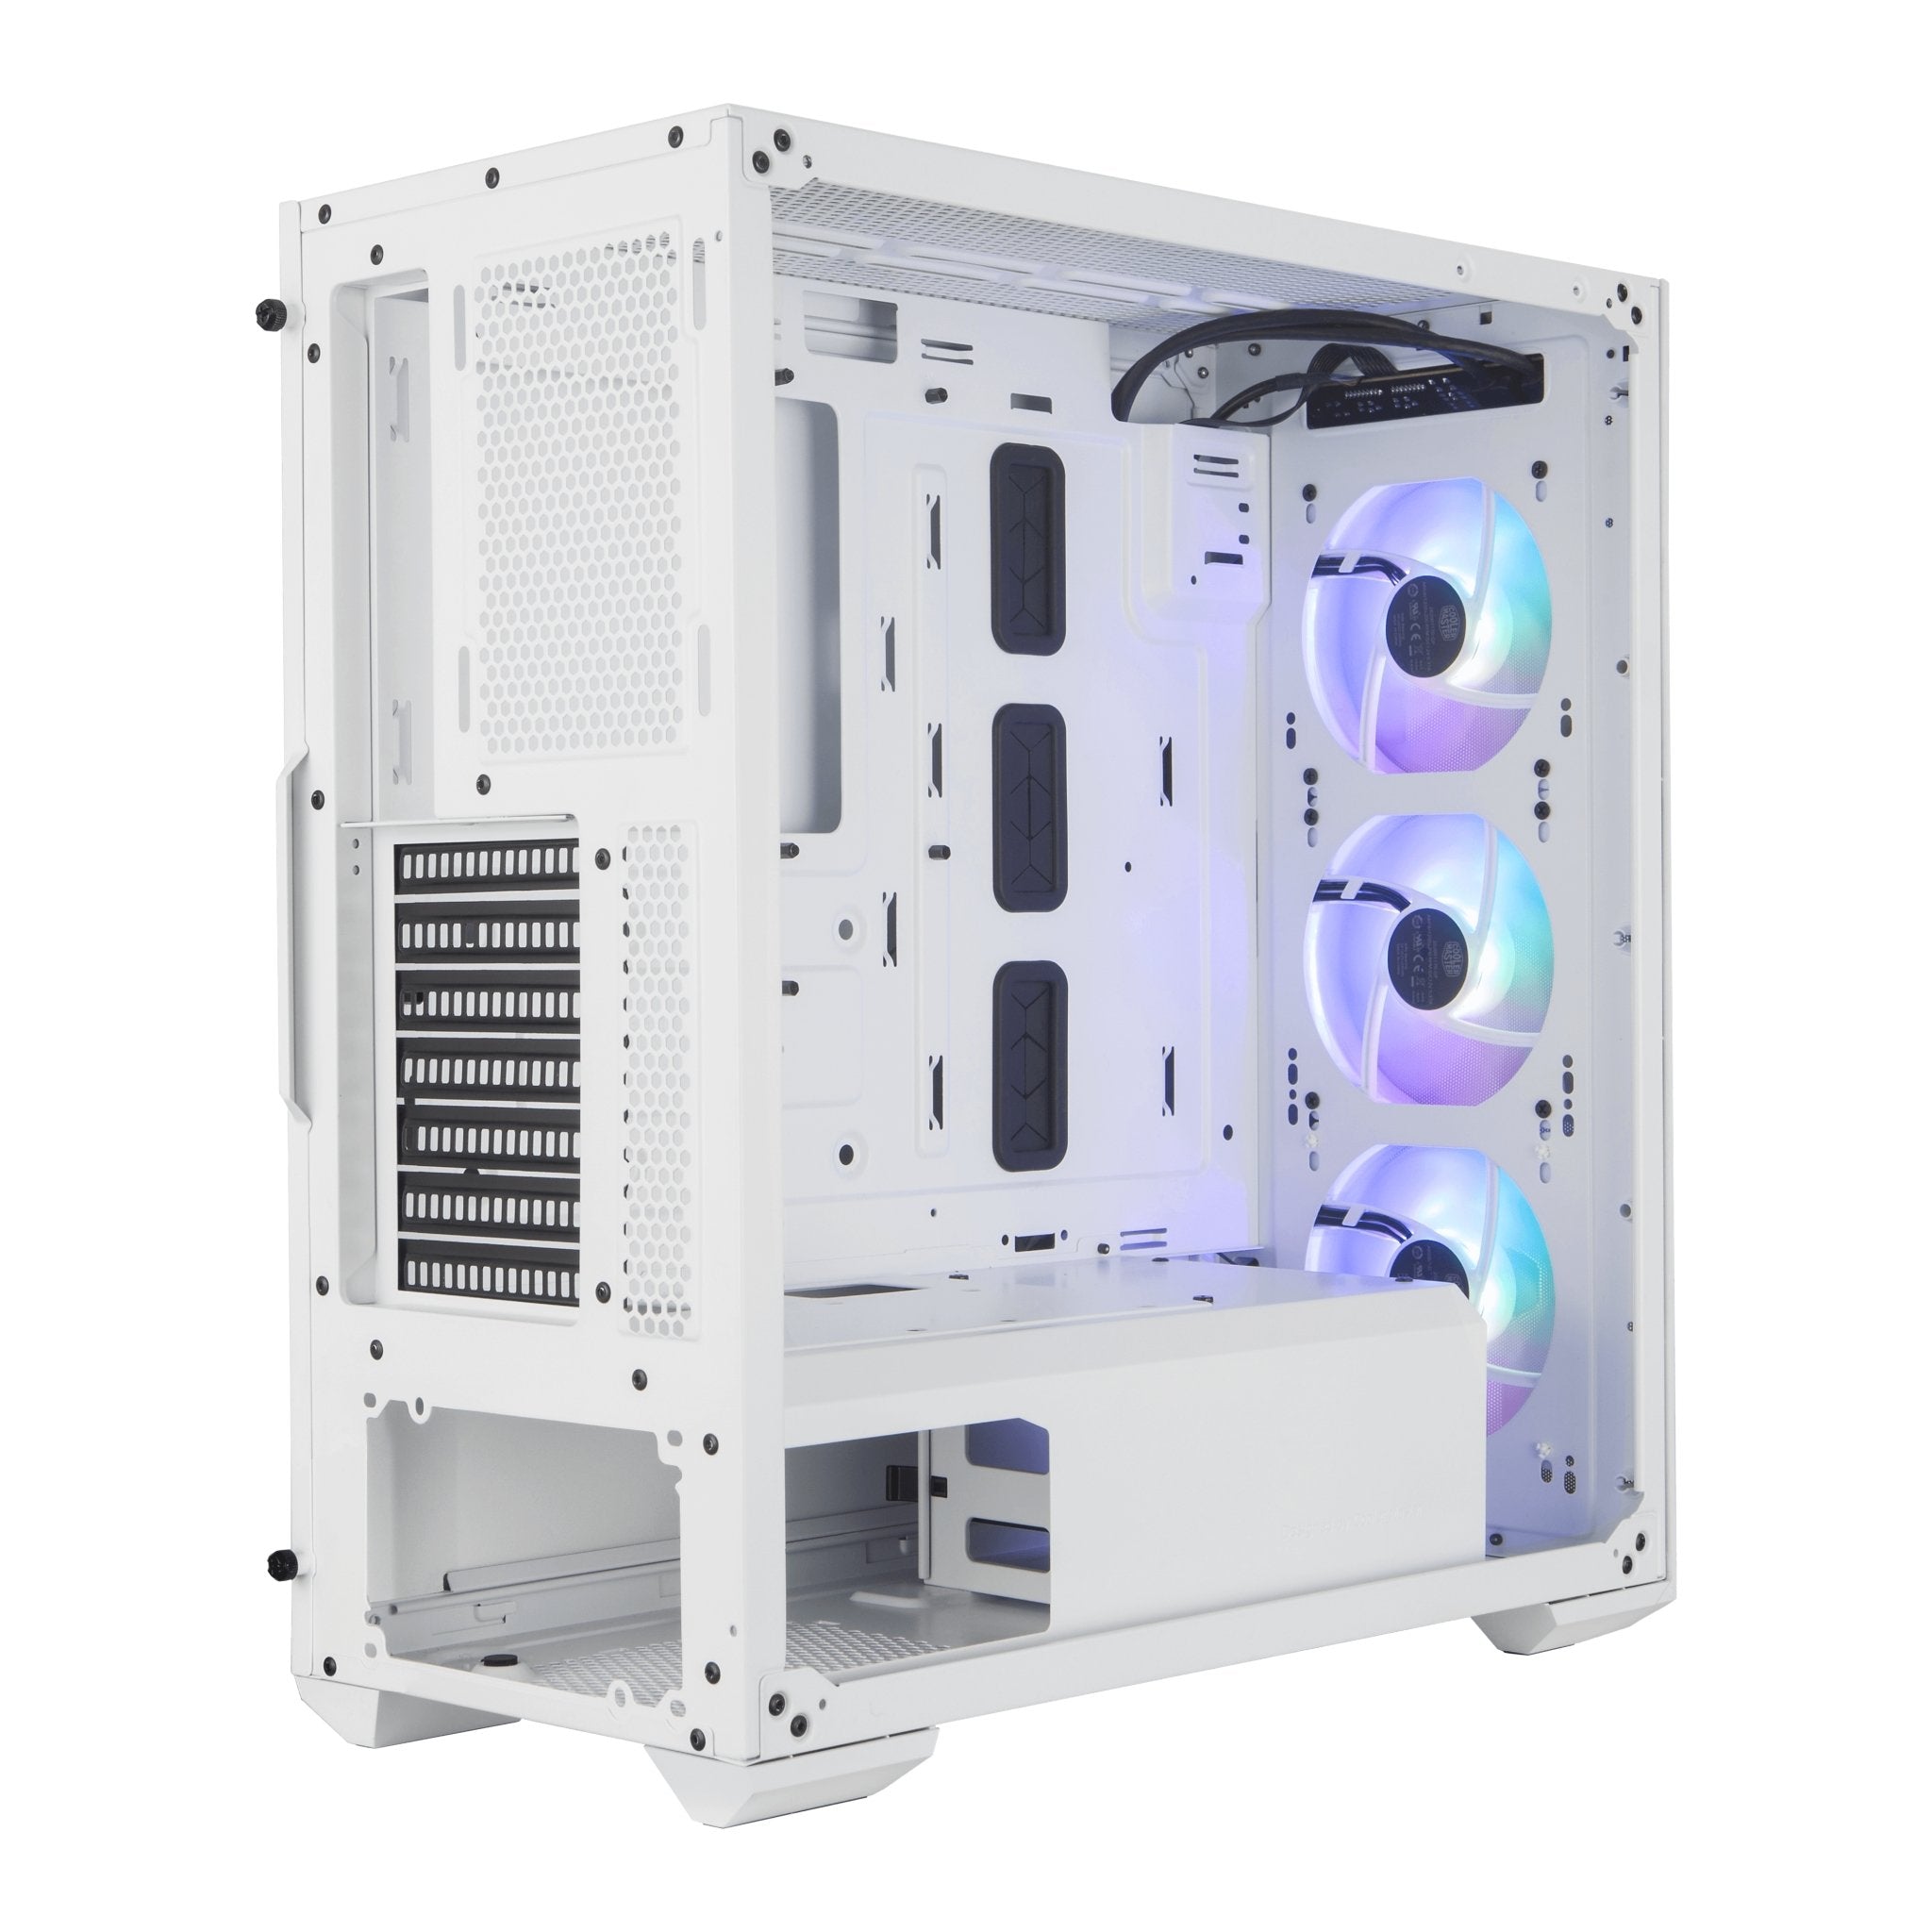 Cooler Master Masterbox TD500 Mesh White WITH Fan Controller - I Gaming Computer | Australia Wide Shipping | Buy now, Pay Later with Afterpay, Klarna, Zip, Latitude & Paypal